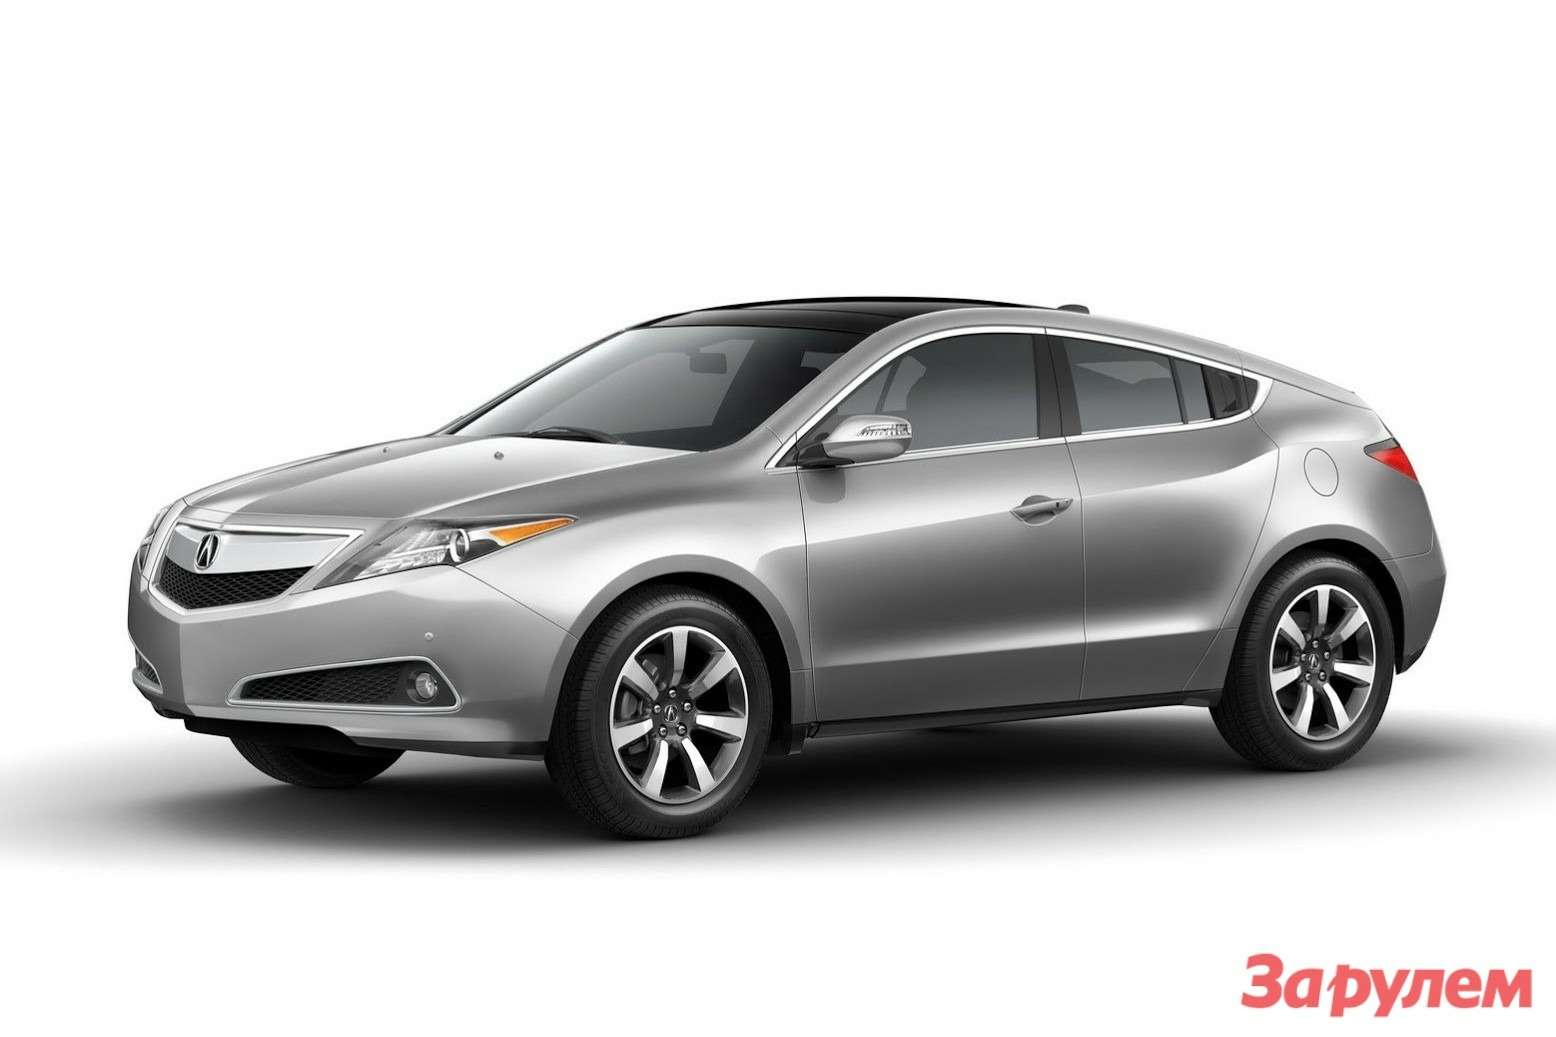 2013 Acura ZDX side-front view